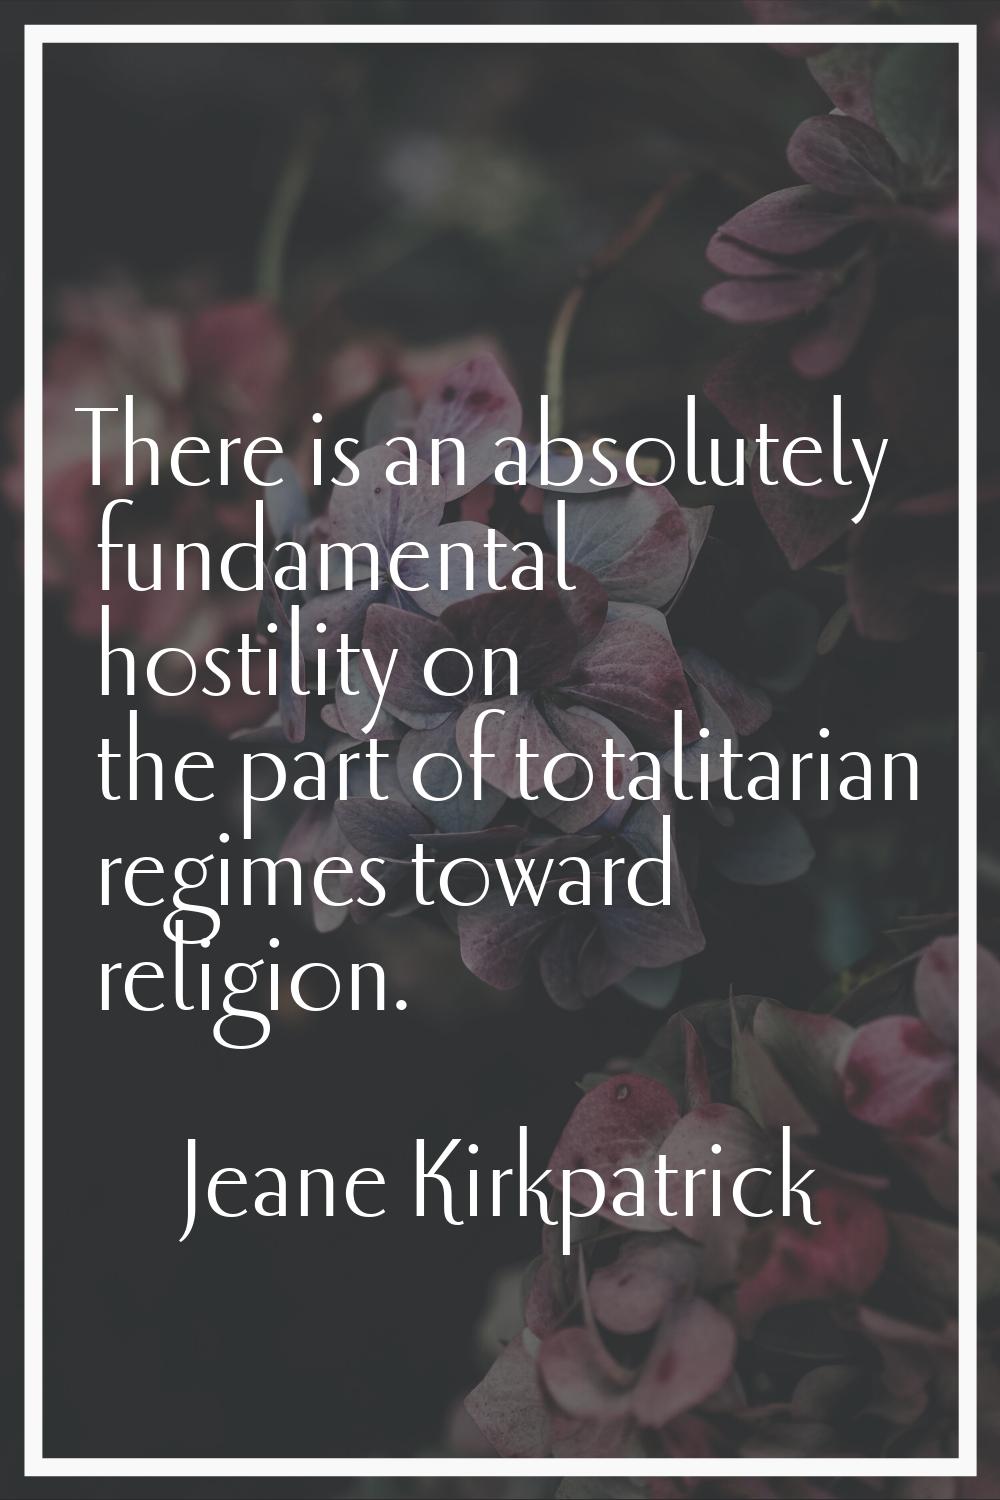 There is an absolutely fundamental hostility on the part of totalitarian regimes toward religion.